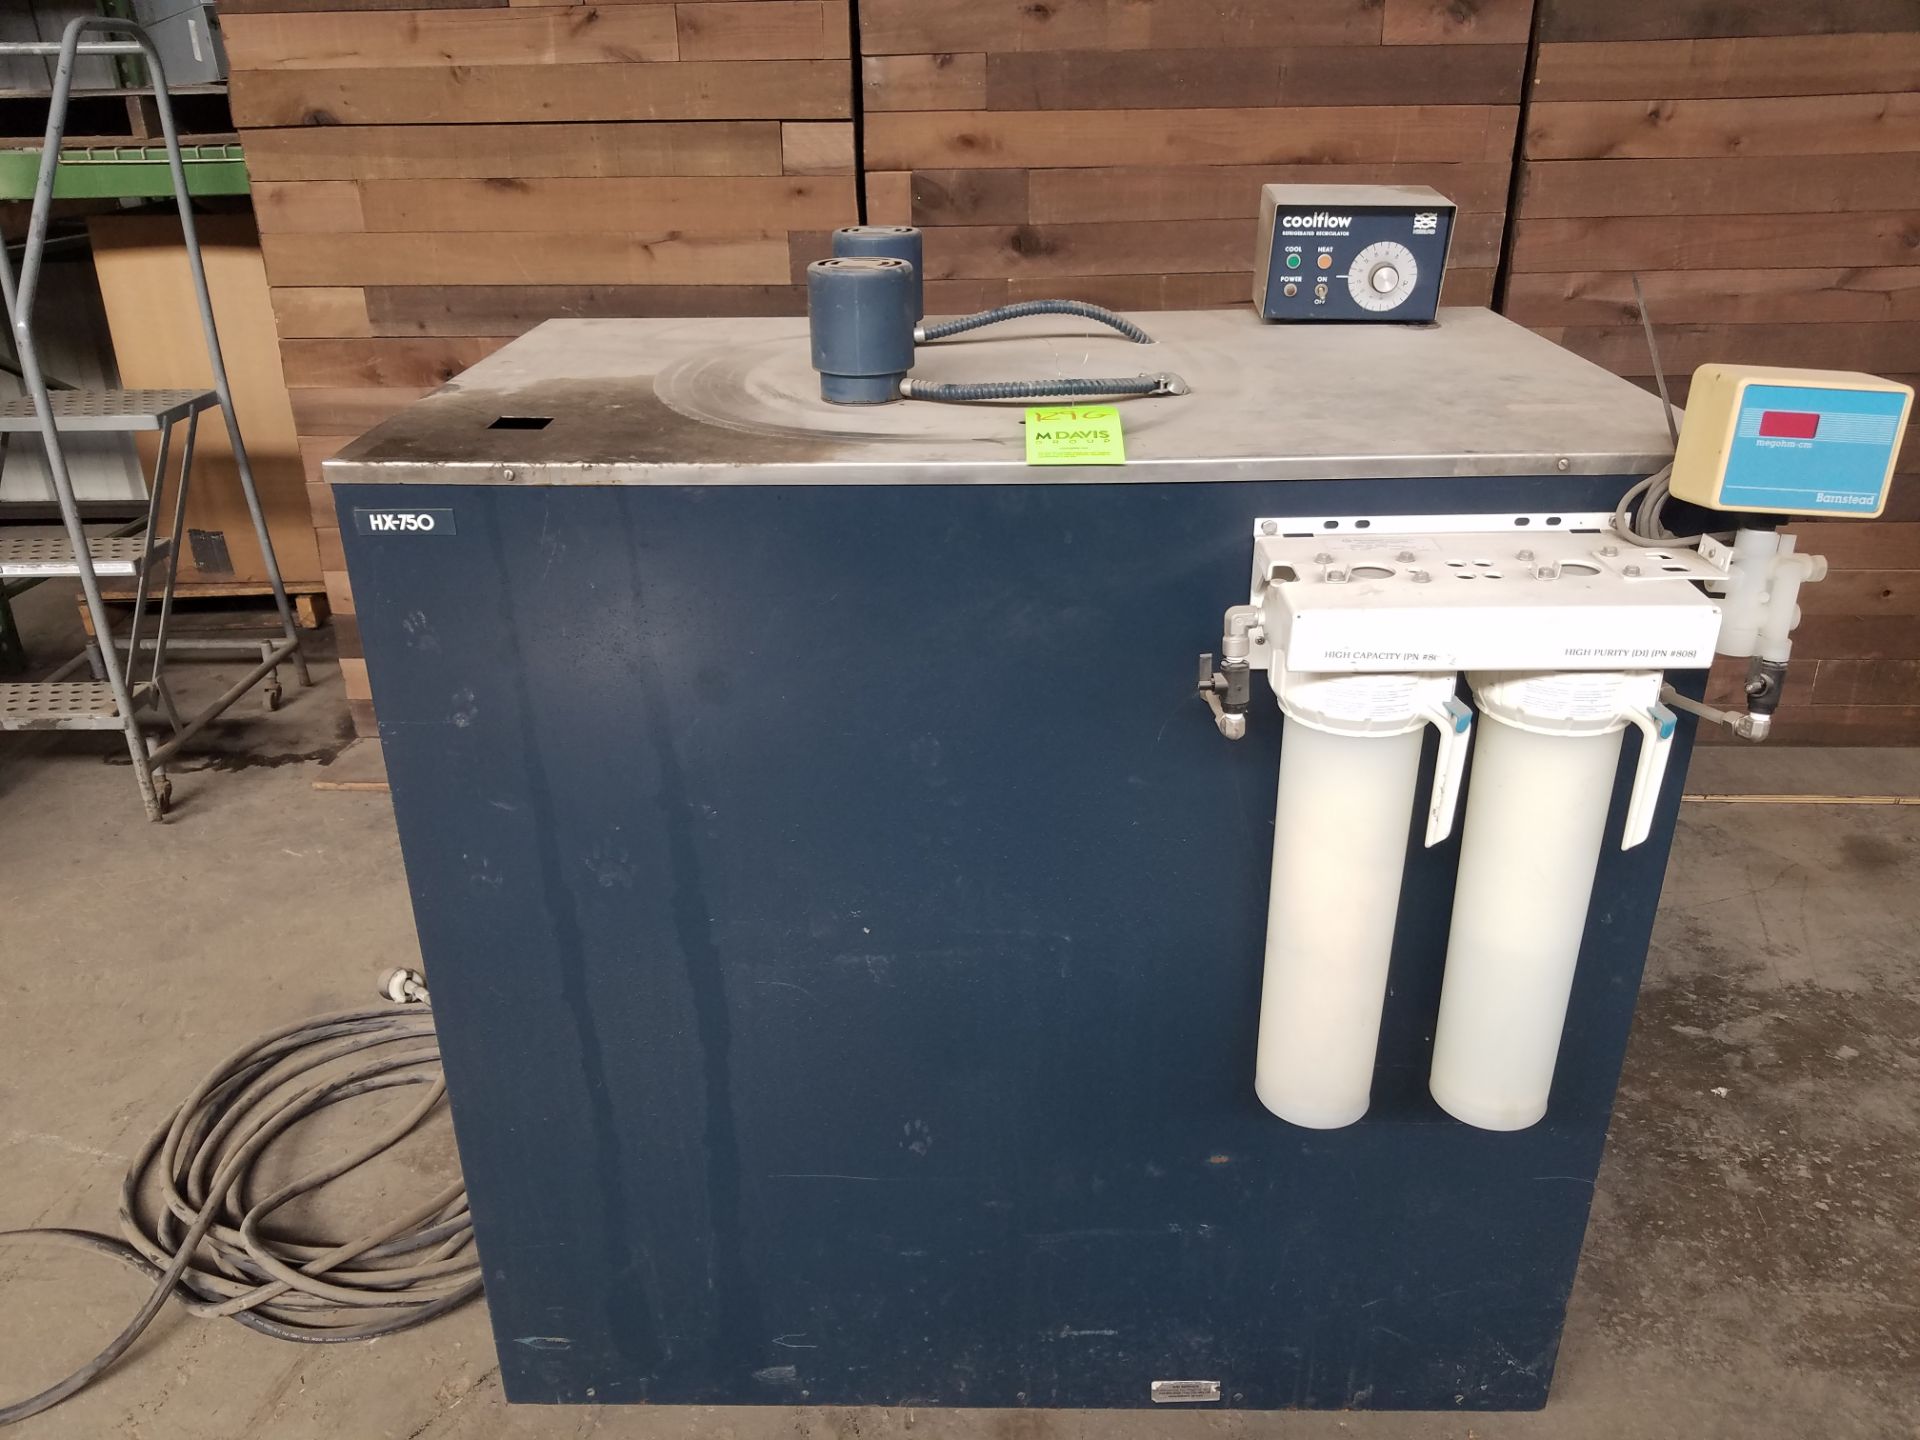 Neslab HX-750 Coolflow refrigerated recirculor, serial # 10901-X-1, volt 220, 3-phase - Image 2 of 5